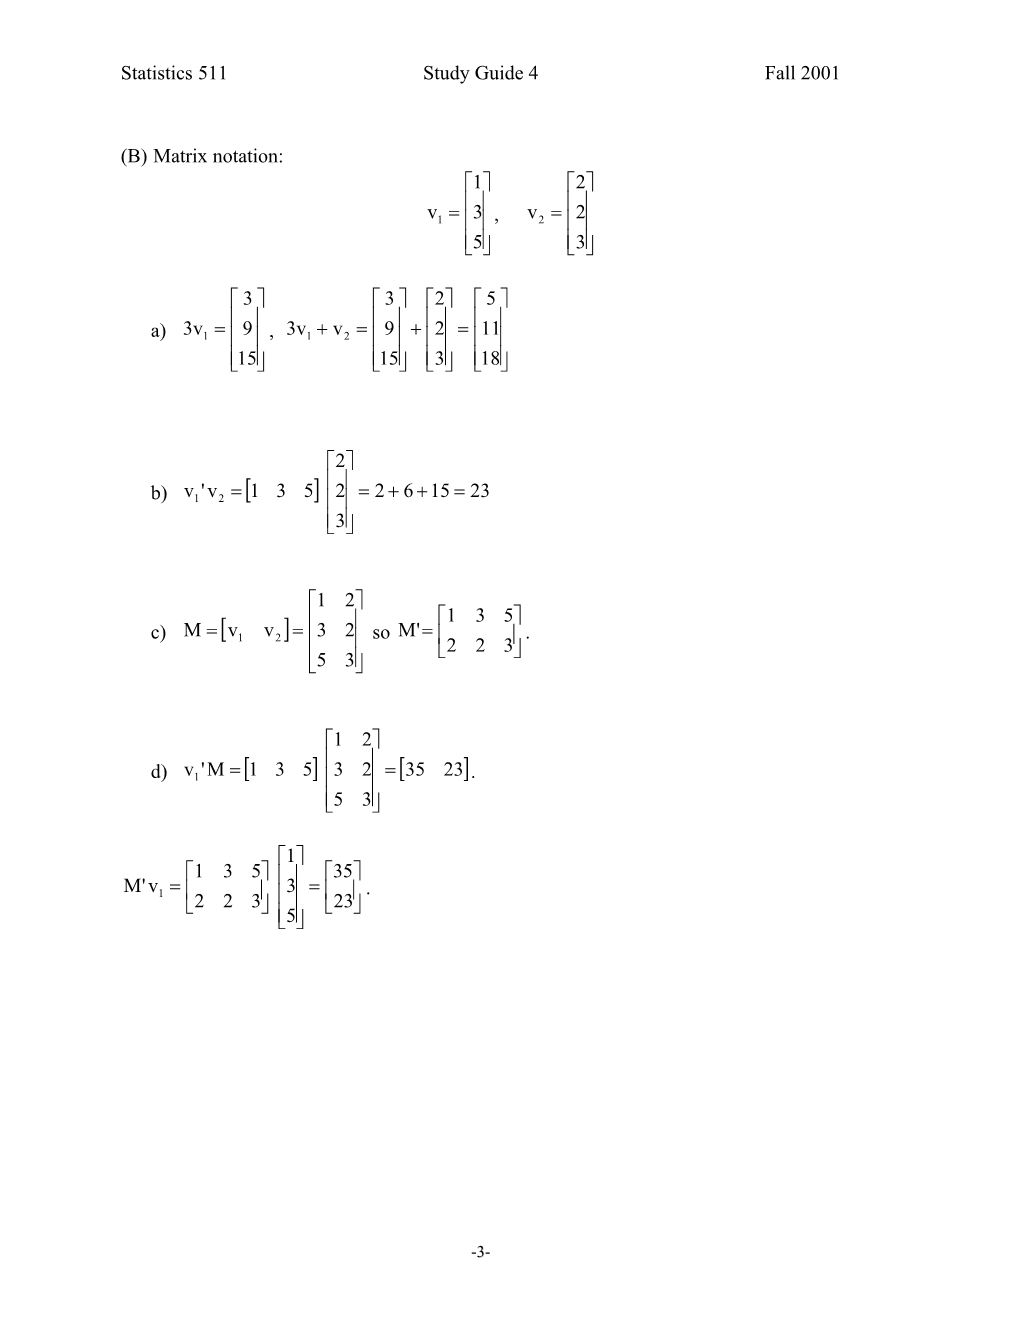 A) Random Variables And Linear Combinations